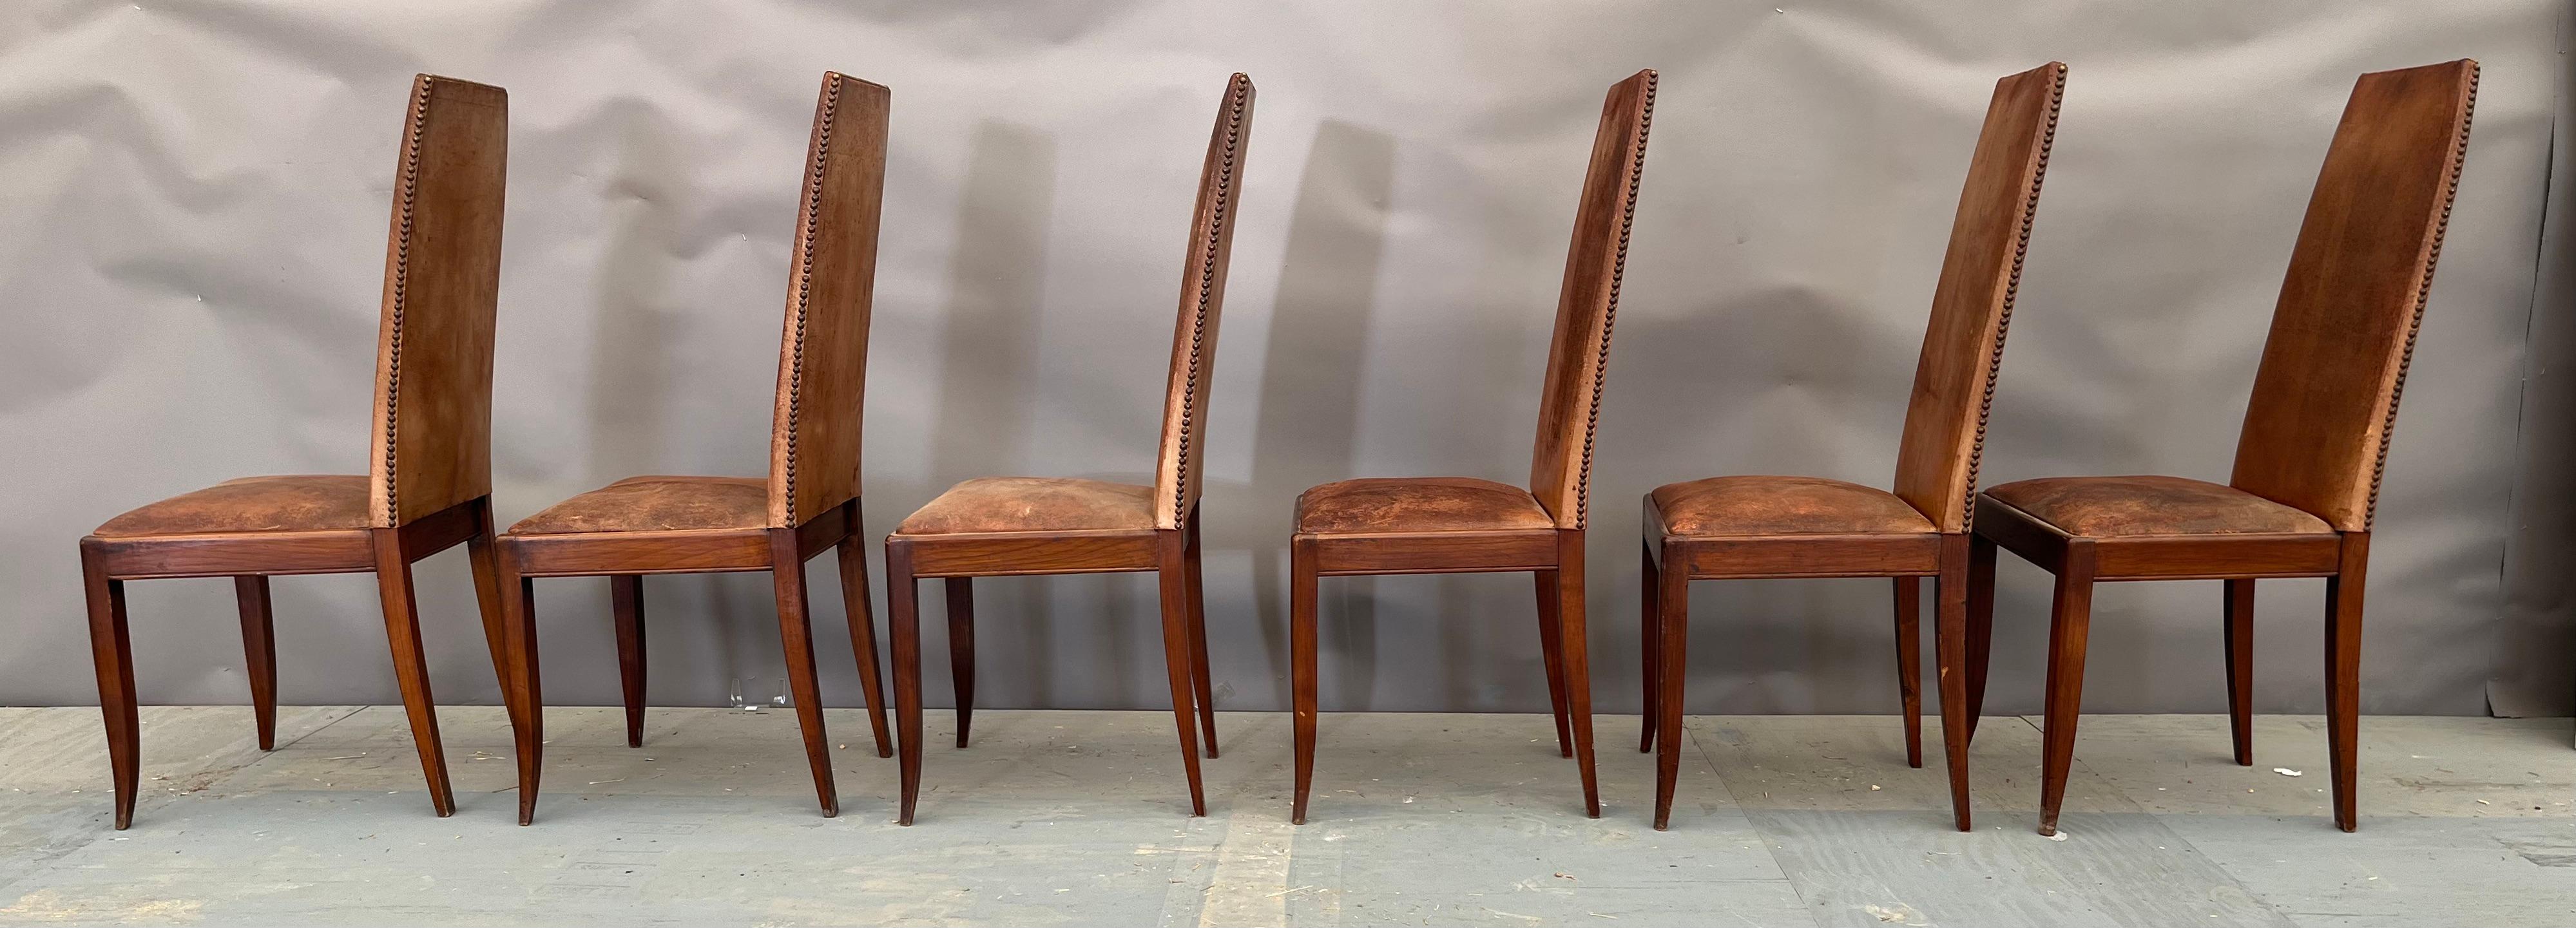 Set of six beautiful leather and wood chairs with beautiful patina to the leather and nailheads. These chairs were found in France and have been invited to many dinner parties - if only they could talk! These pieces would blend beautifully in a